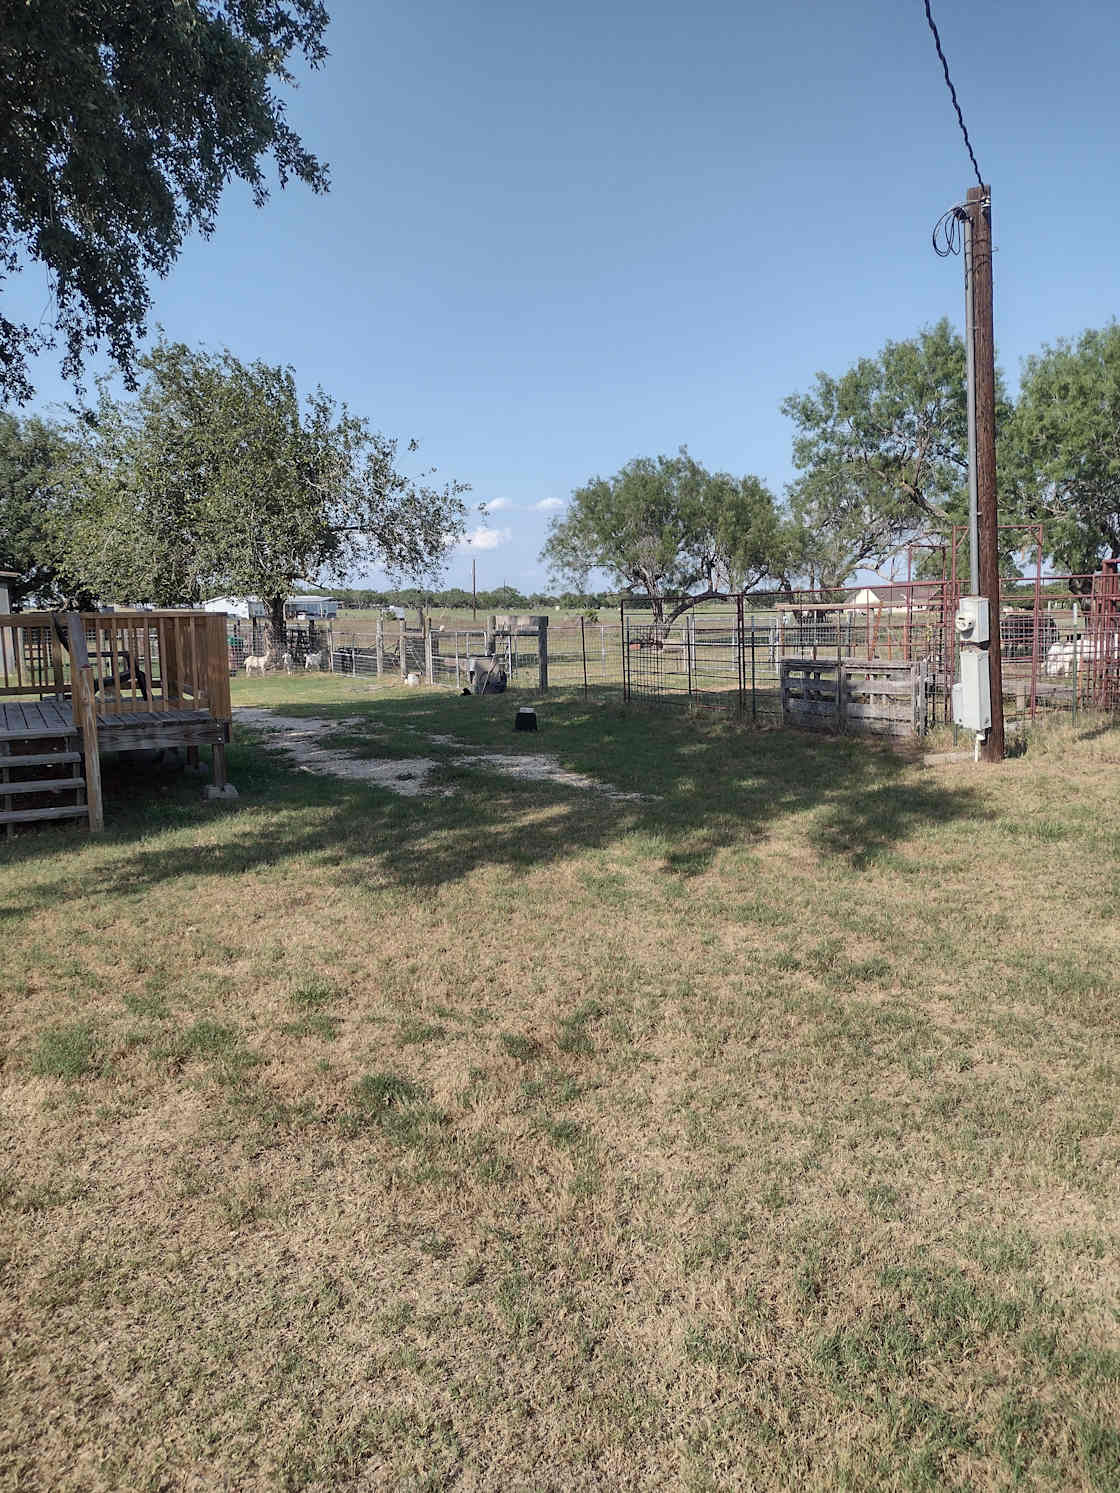 Ranch land with pasture.